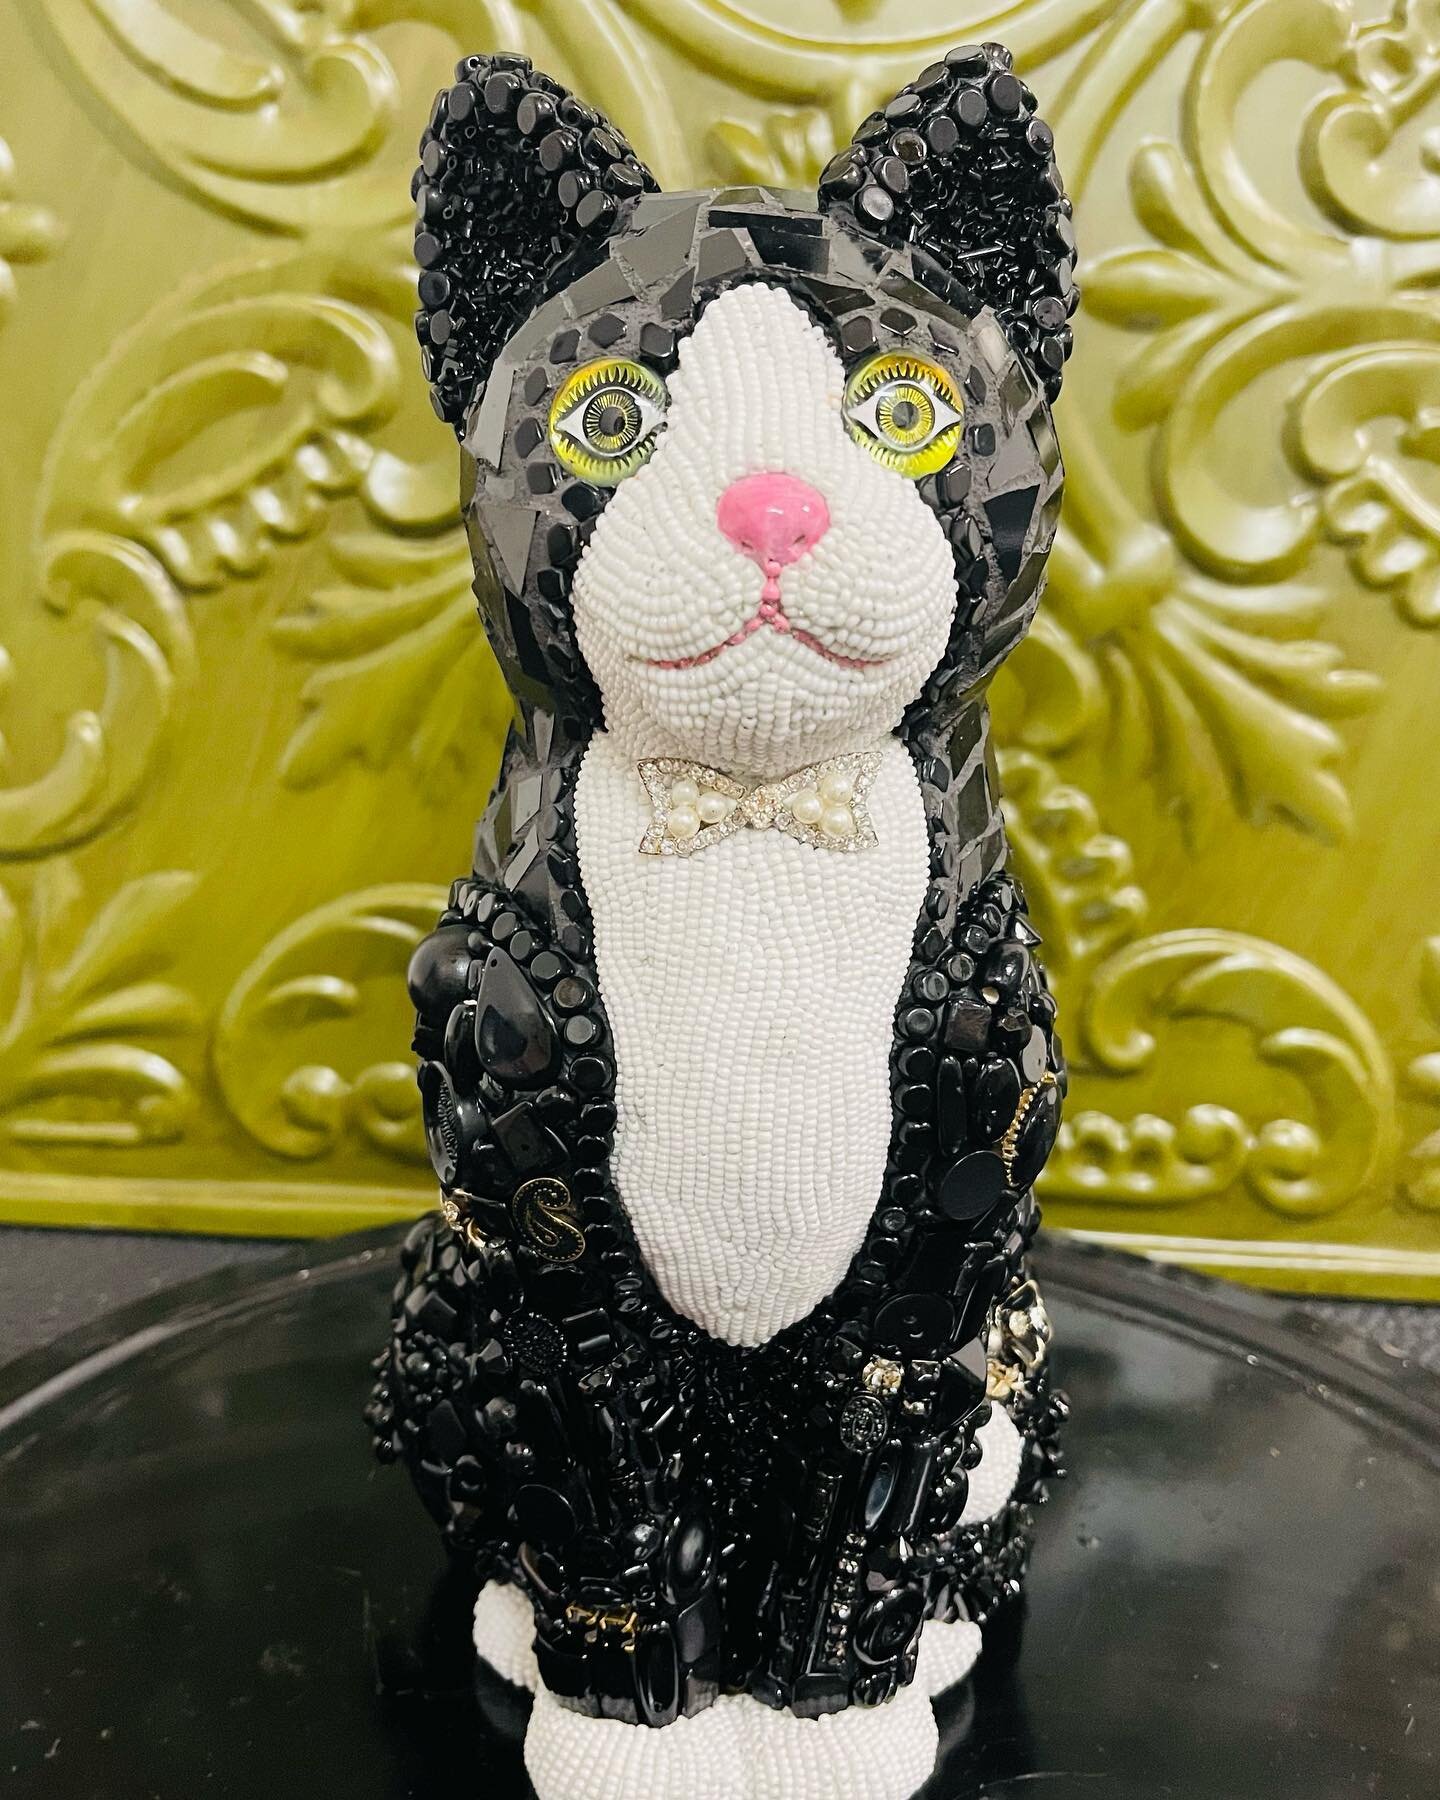 Look who just went home with her new mom! She will be the mascot kitty proudly watching over the new Cats At Play Cafe coming to downtown Asheville this spring. I loved creating her and can&rsquo;t wait to see her new spot. Thank you Lisa!